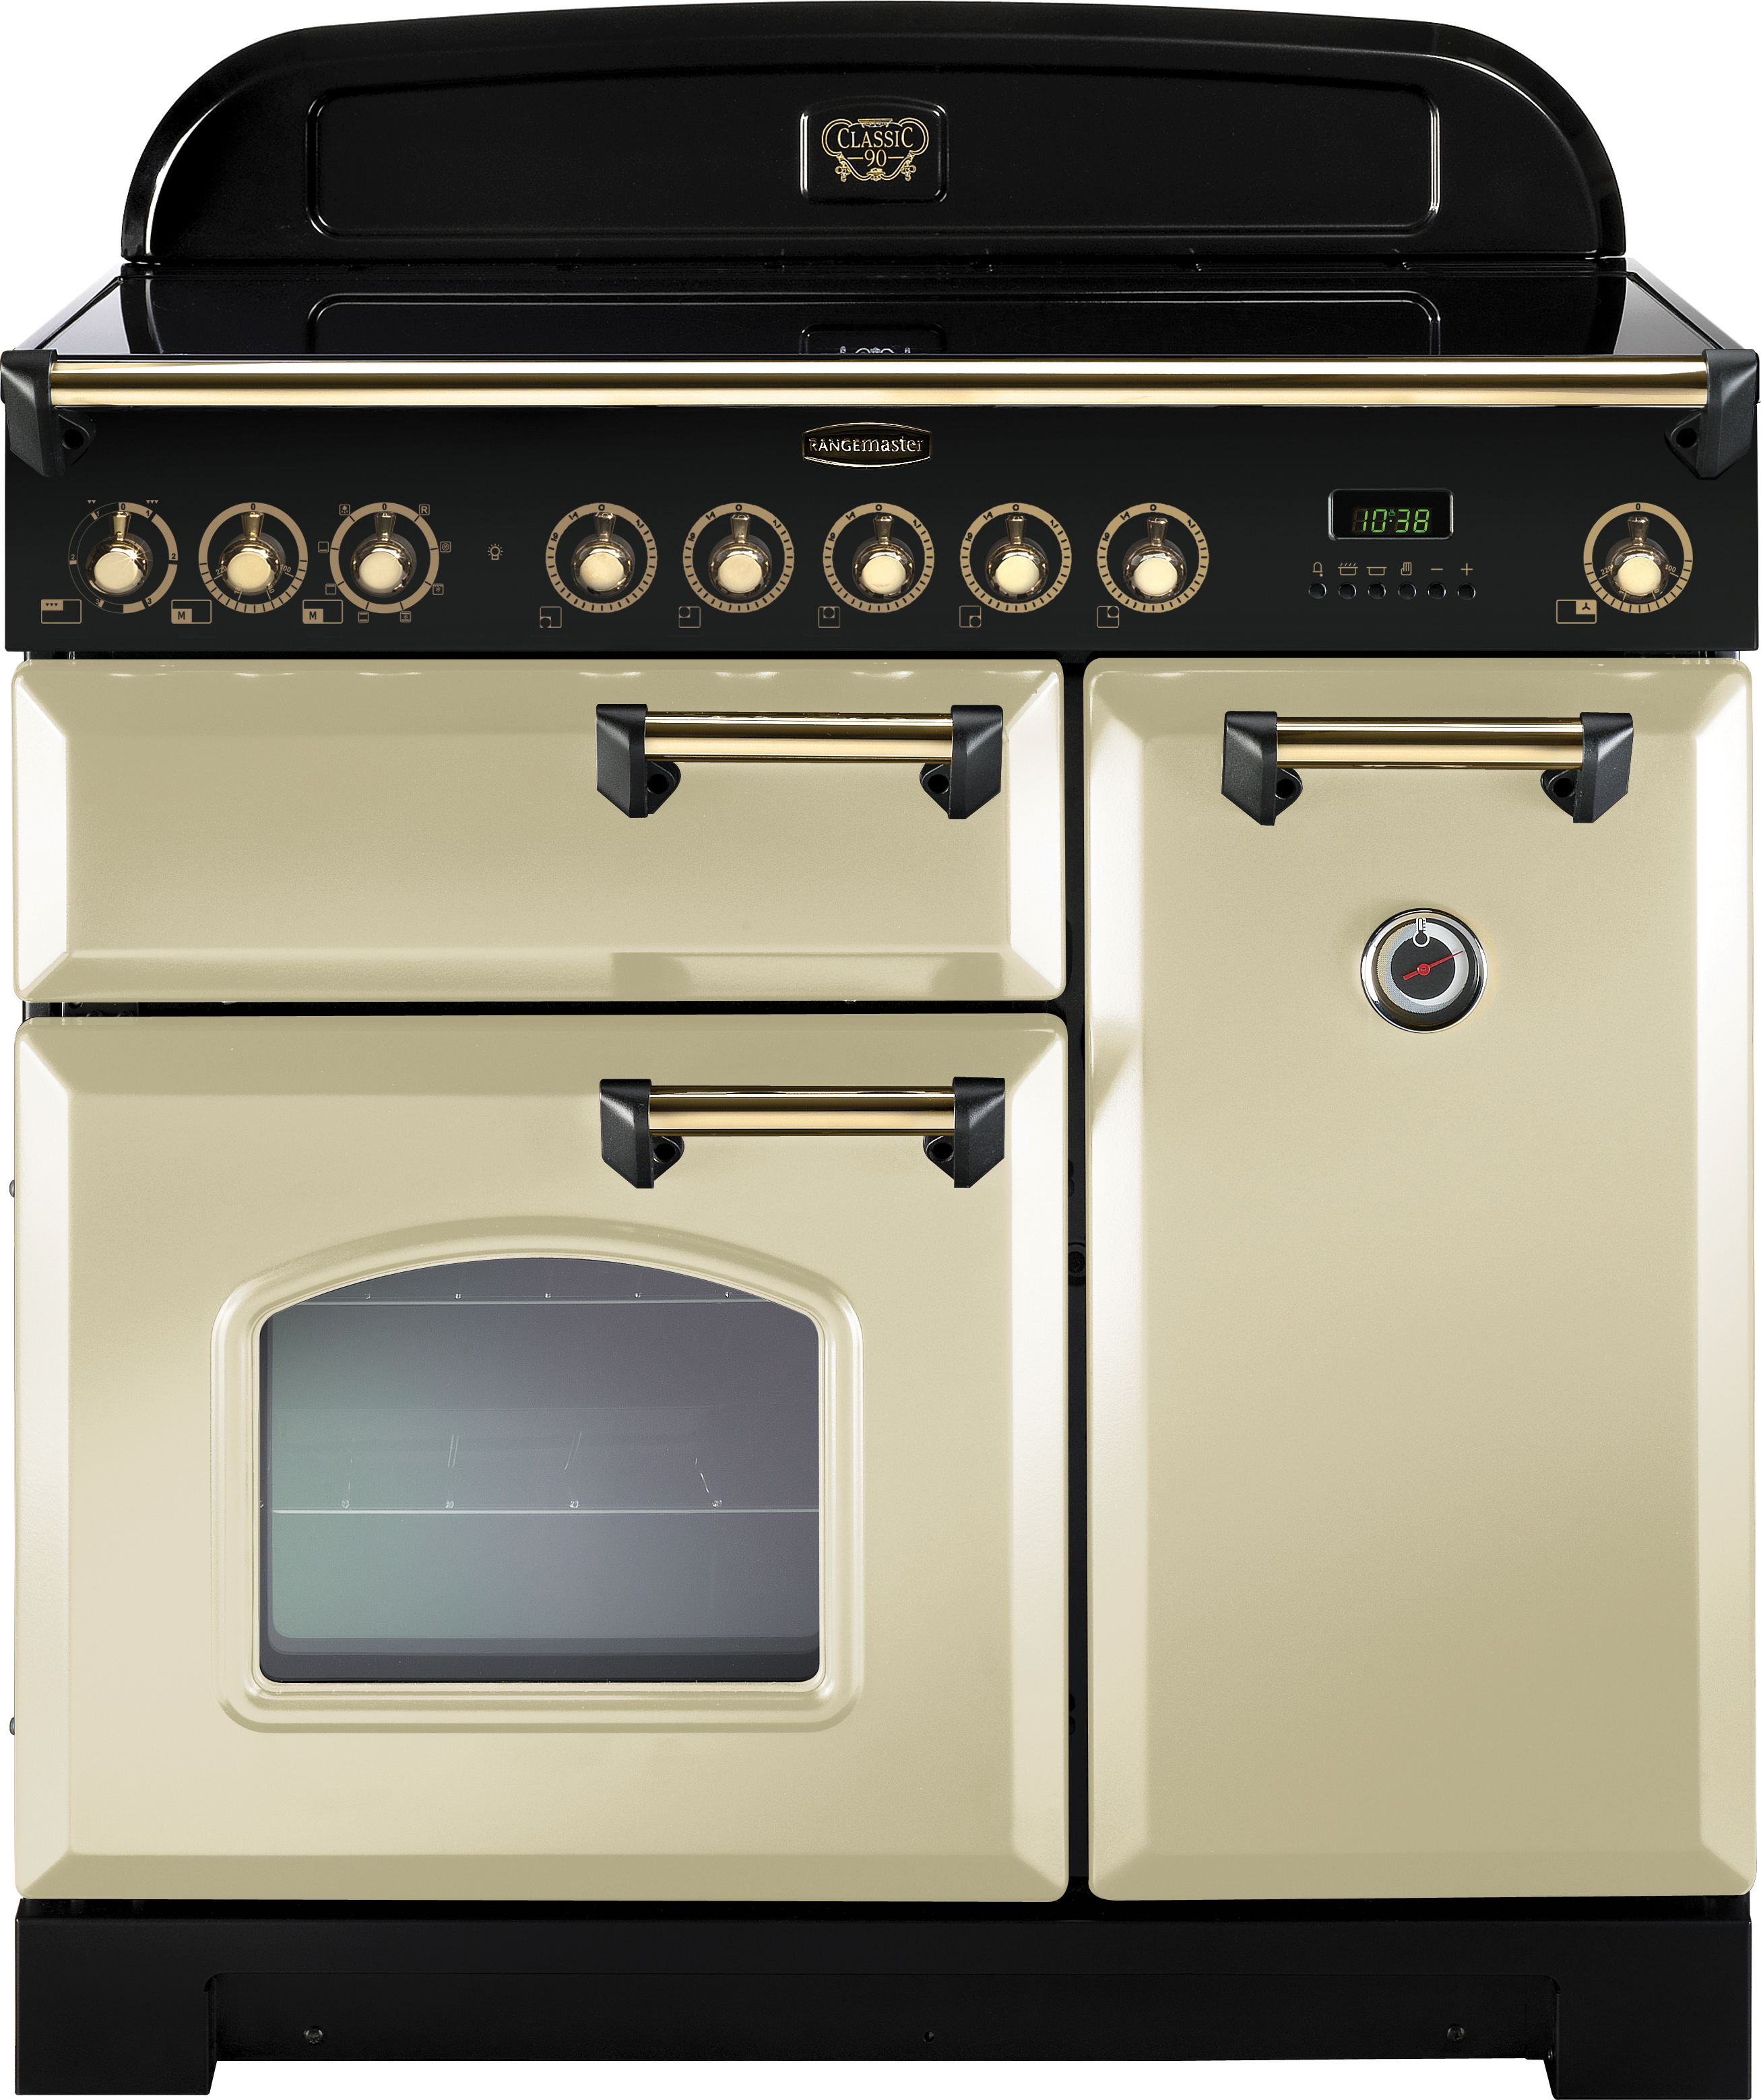 Rangemaster Classic Deluxe CDL90EICR/C 90cm Electric Range Cooker with Induction Hob - Cream / Chrome - A/A Rated, Cream